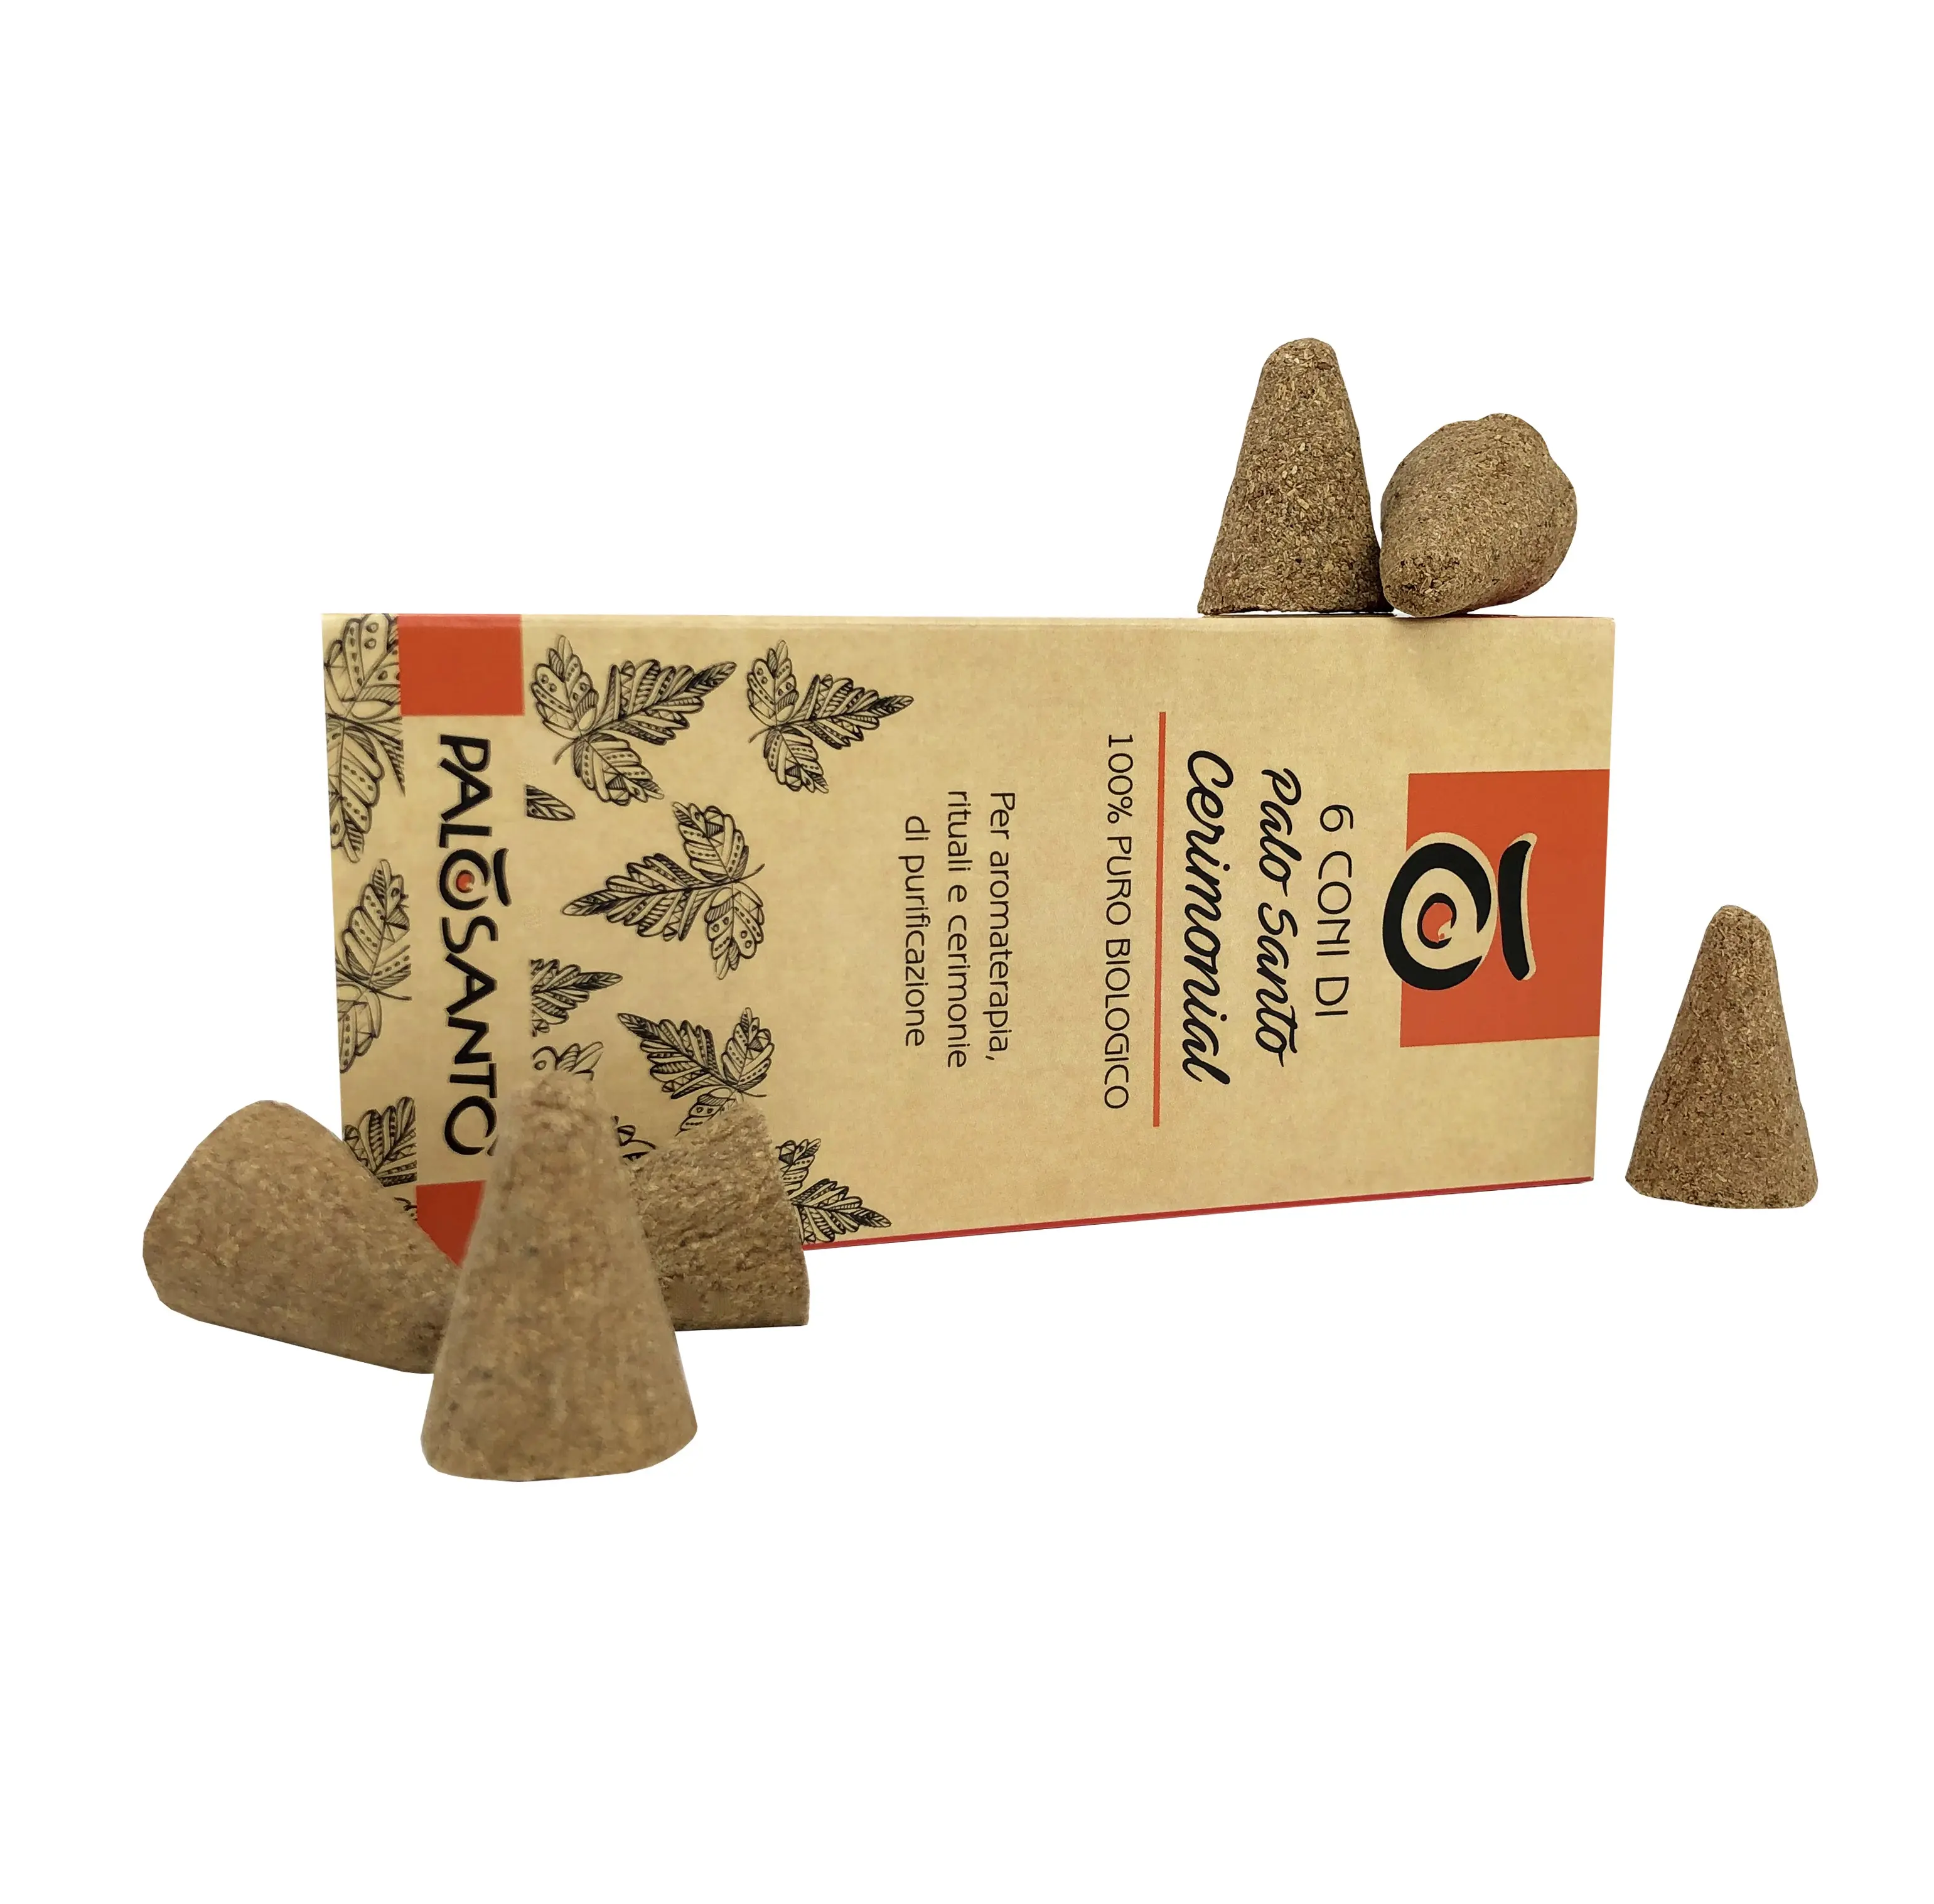 Sustainably Sourced Palo Santo Wood - Palo Santo Incense Cones from Peru - Private Label PALOSANTO Cerimonial - 6 Cones per Pack